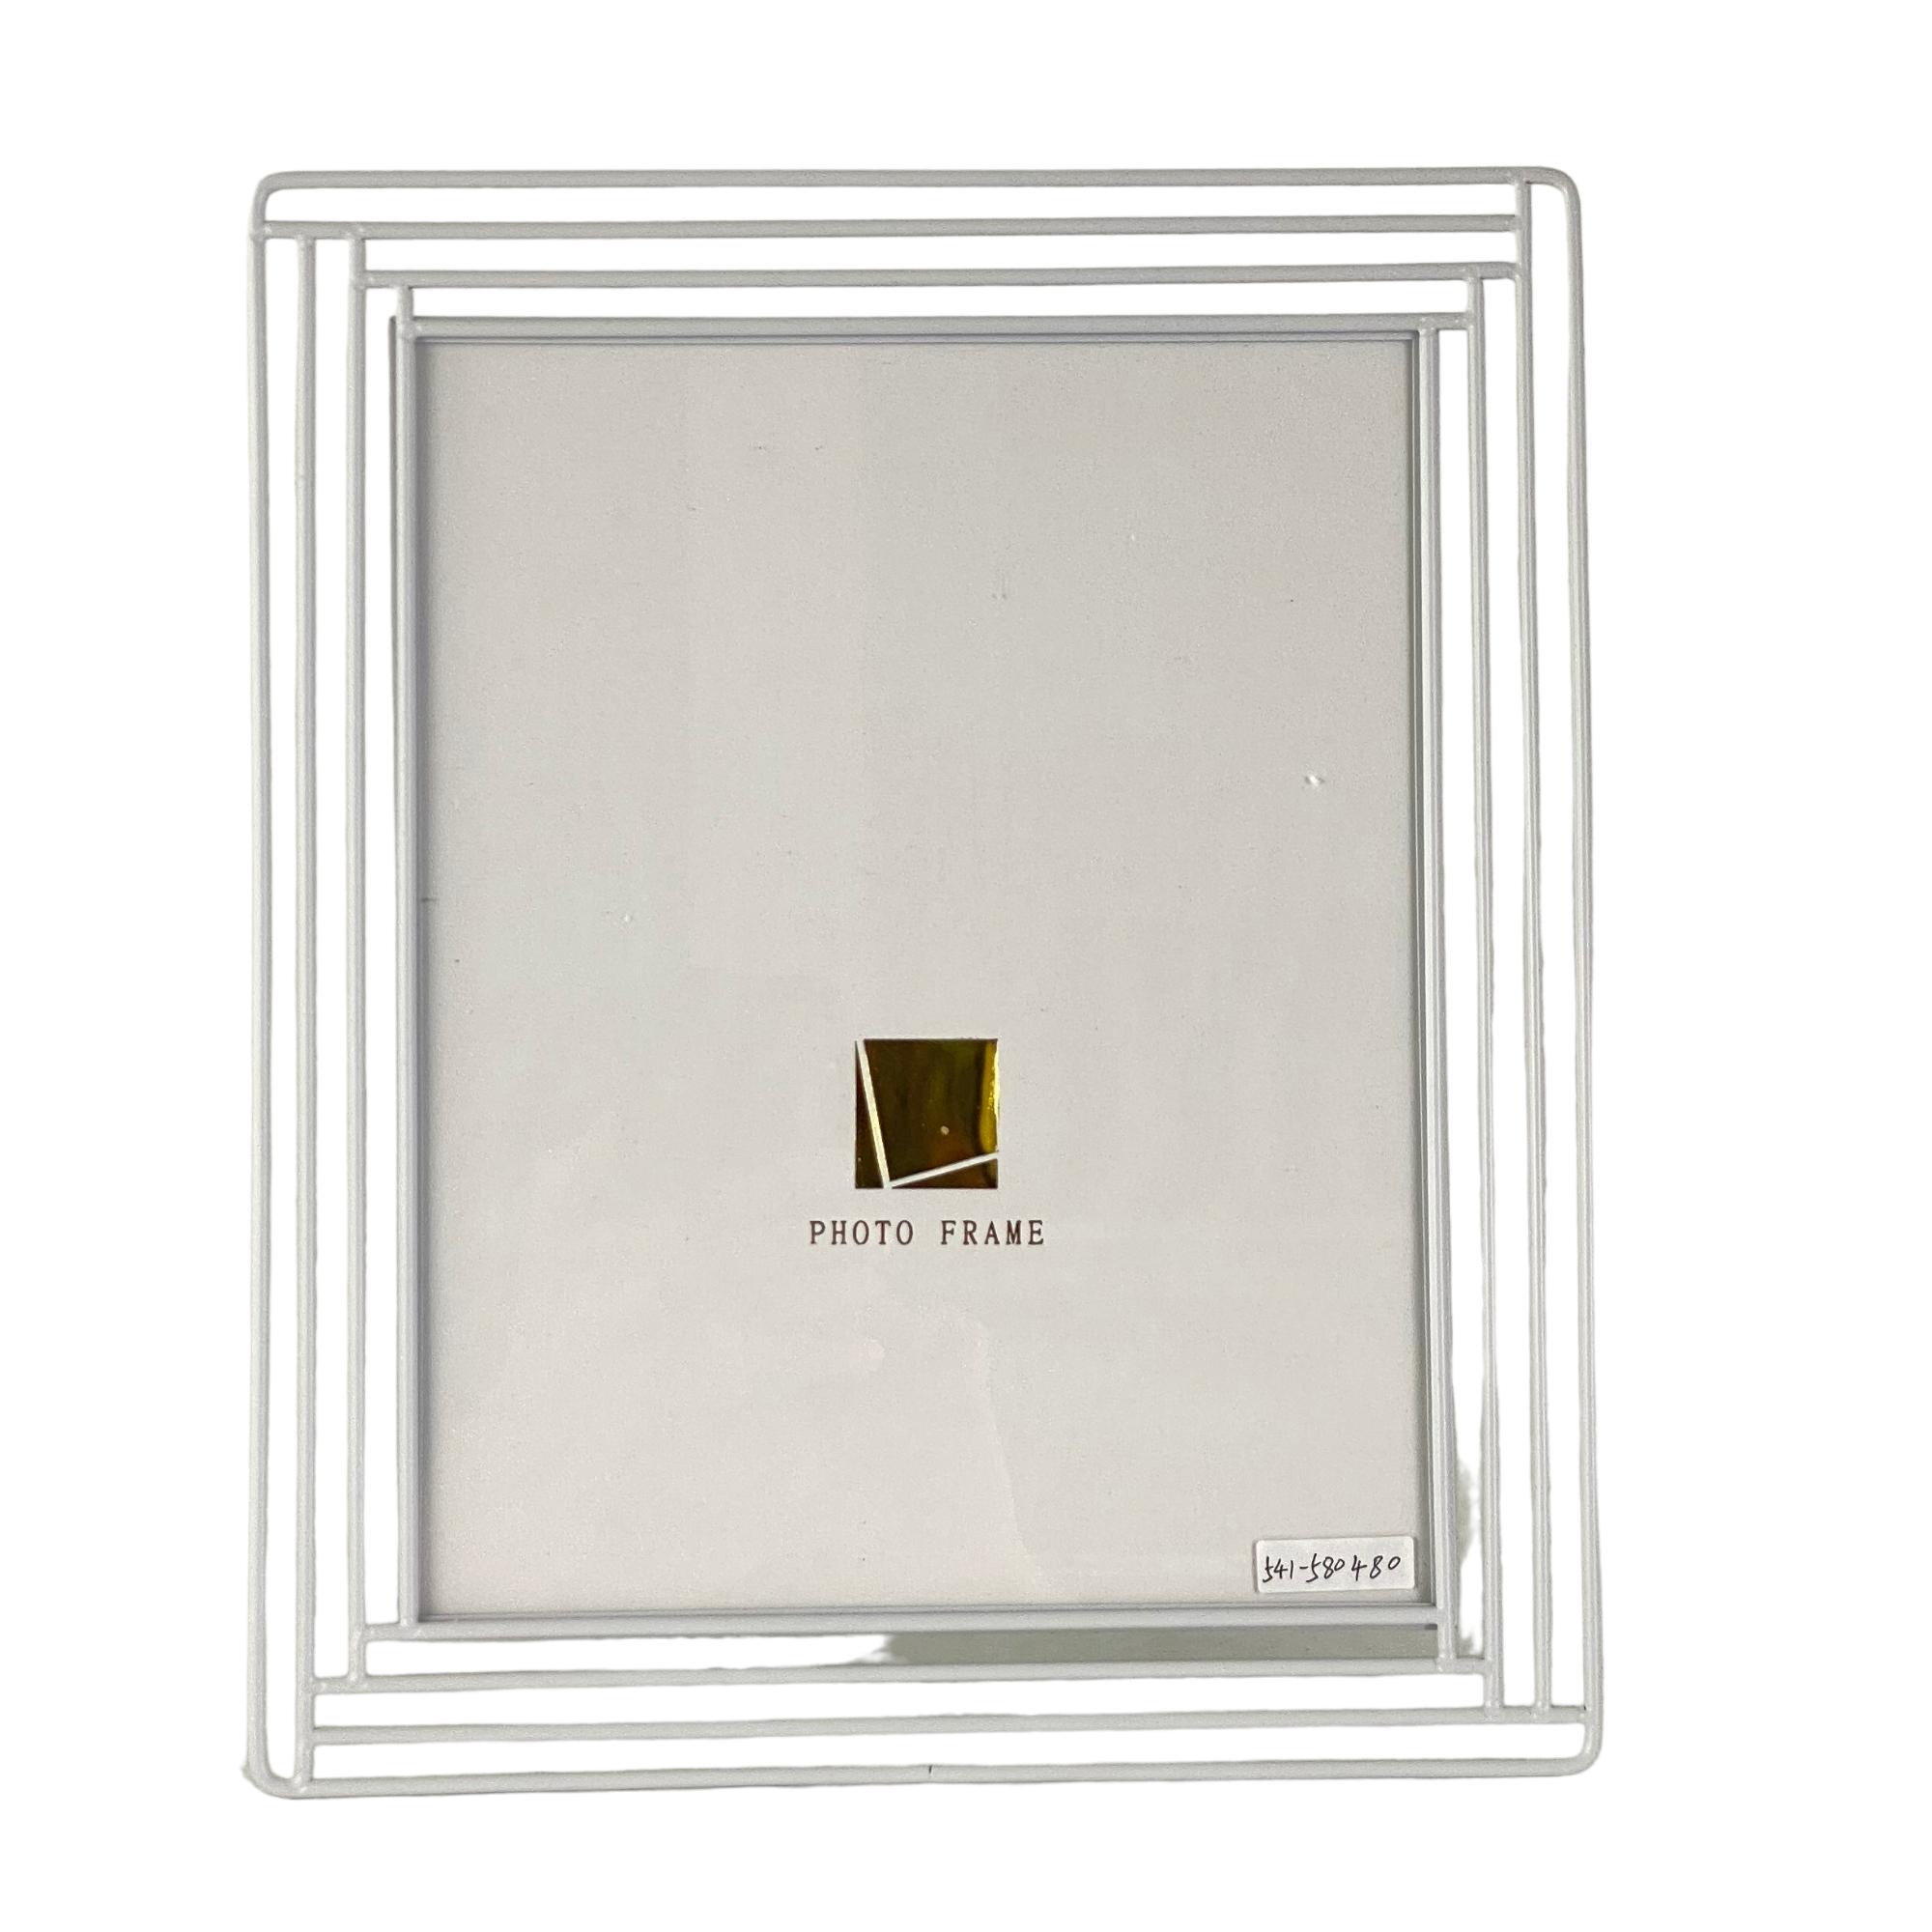 PICTURE FRAME 8X10 31 X 26 X 2.1 CM - 541-580480